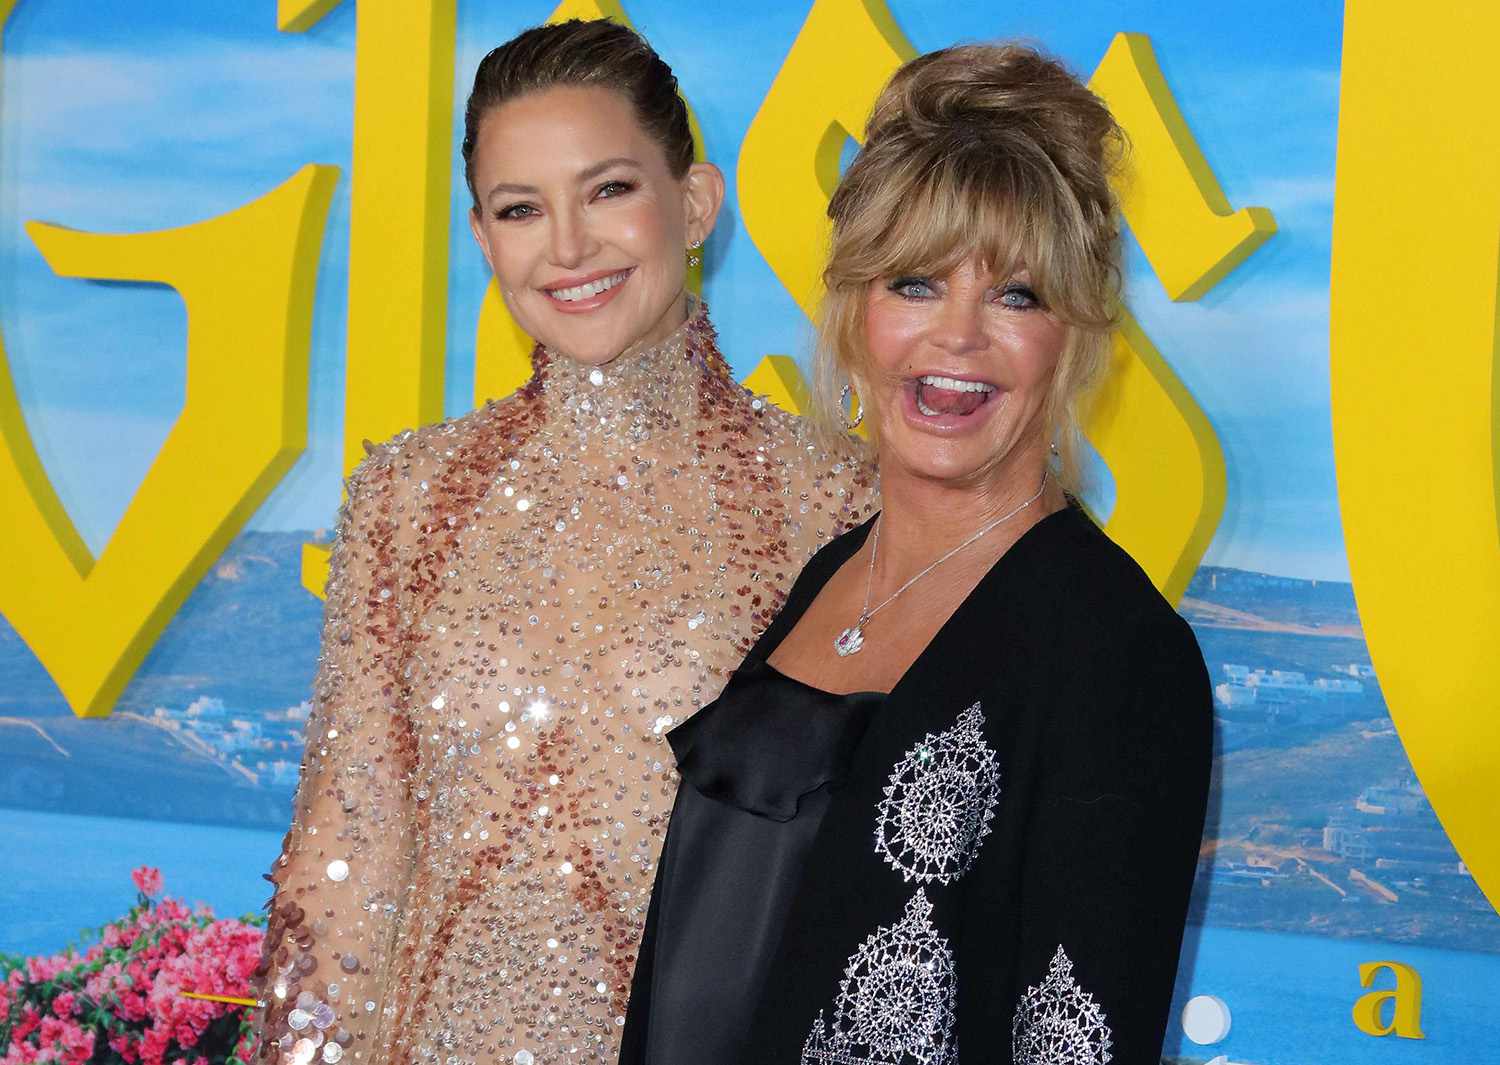 Kate Hudson (L) and her mom actress Goldie Hawn (R) arrive for Netflix's "Glass Onion: A Knives Out Mystery" premiere